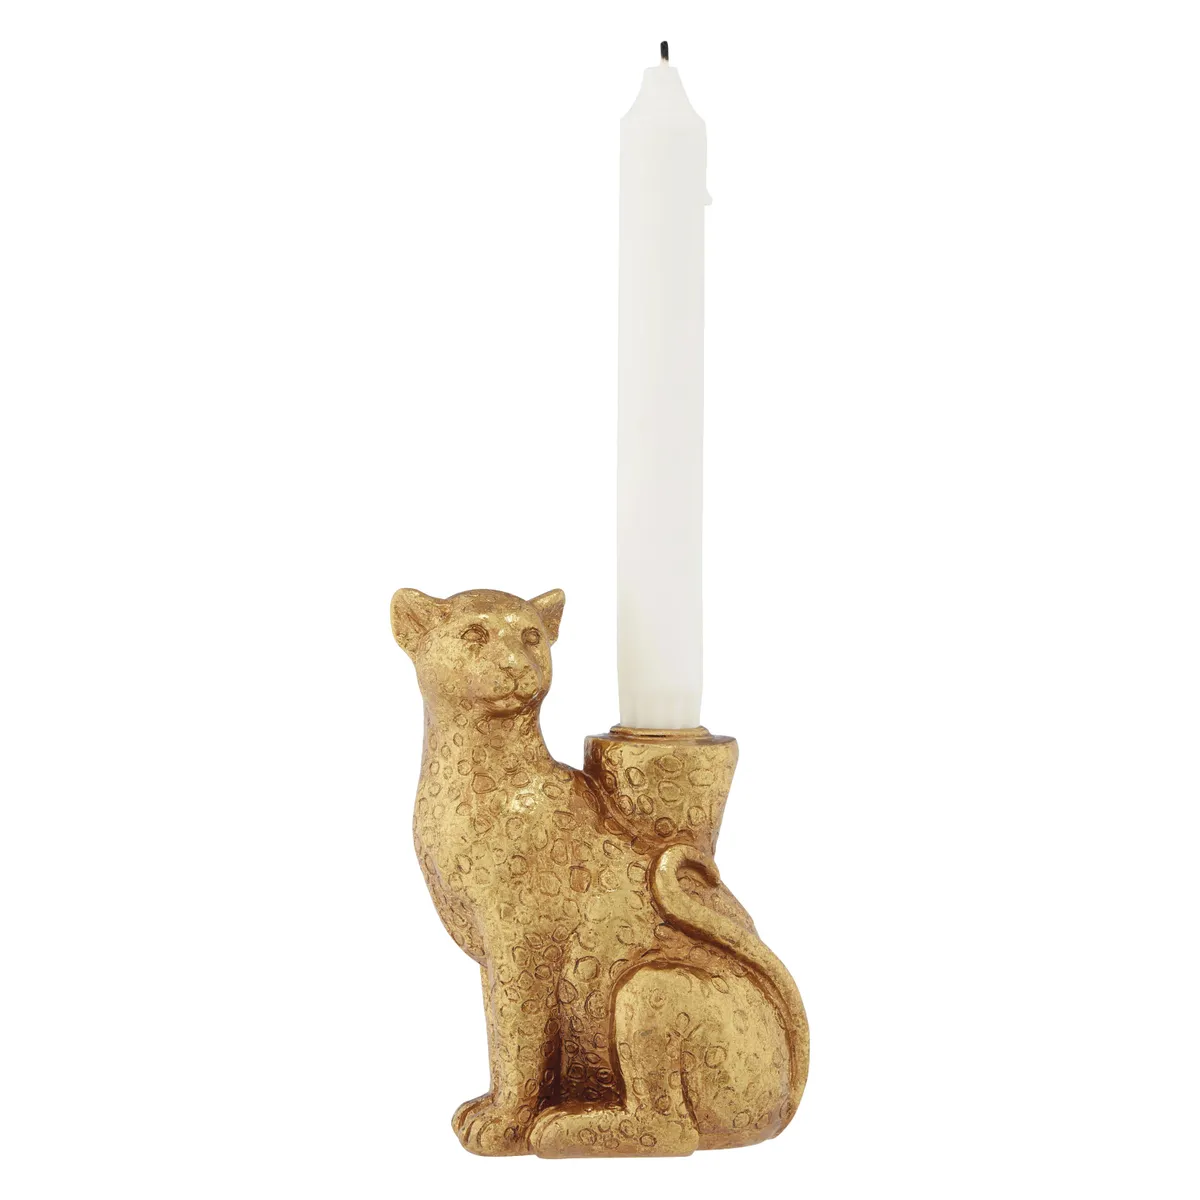 Leopard candlestick, £4, George Home